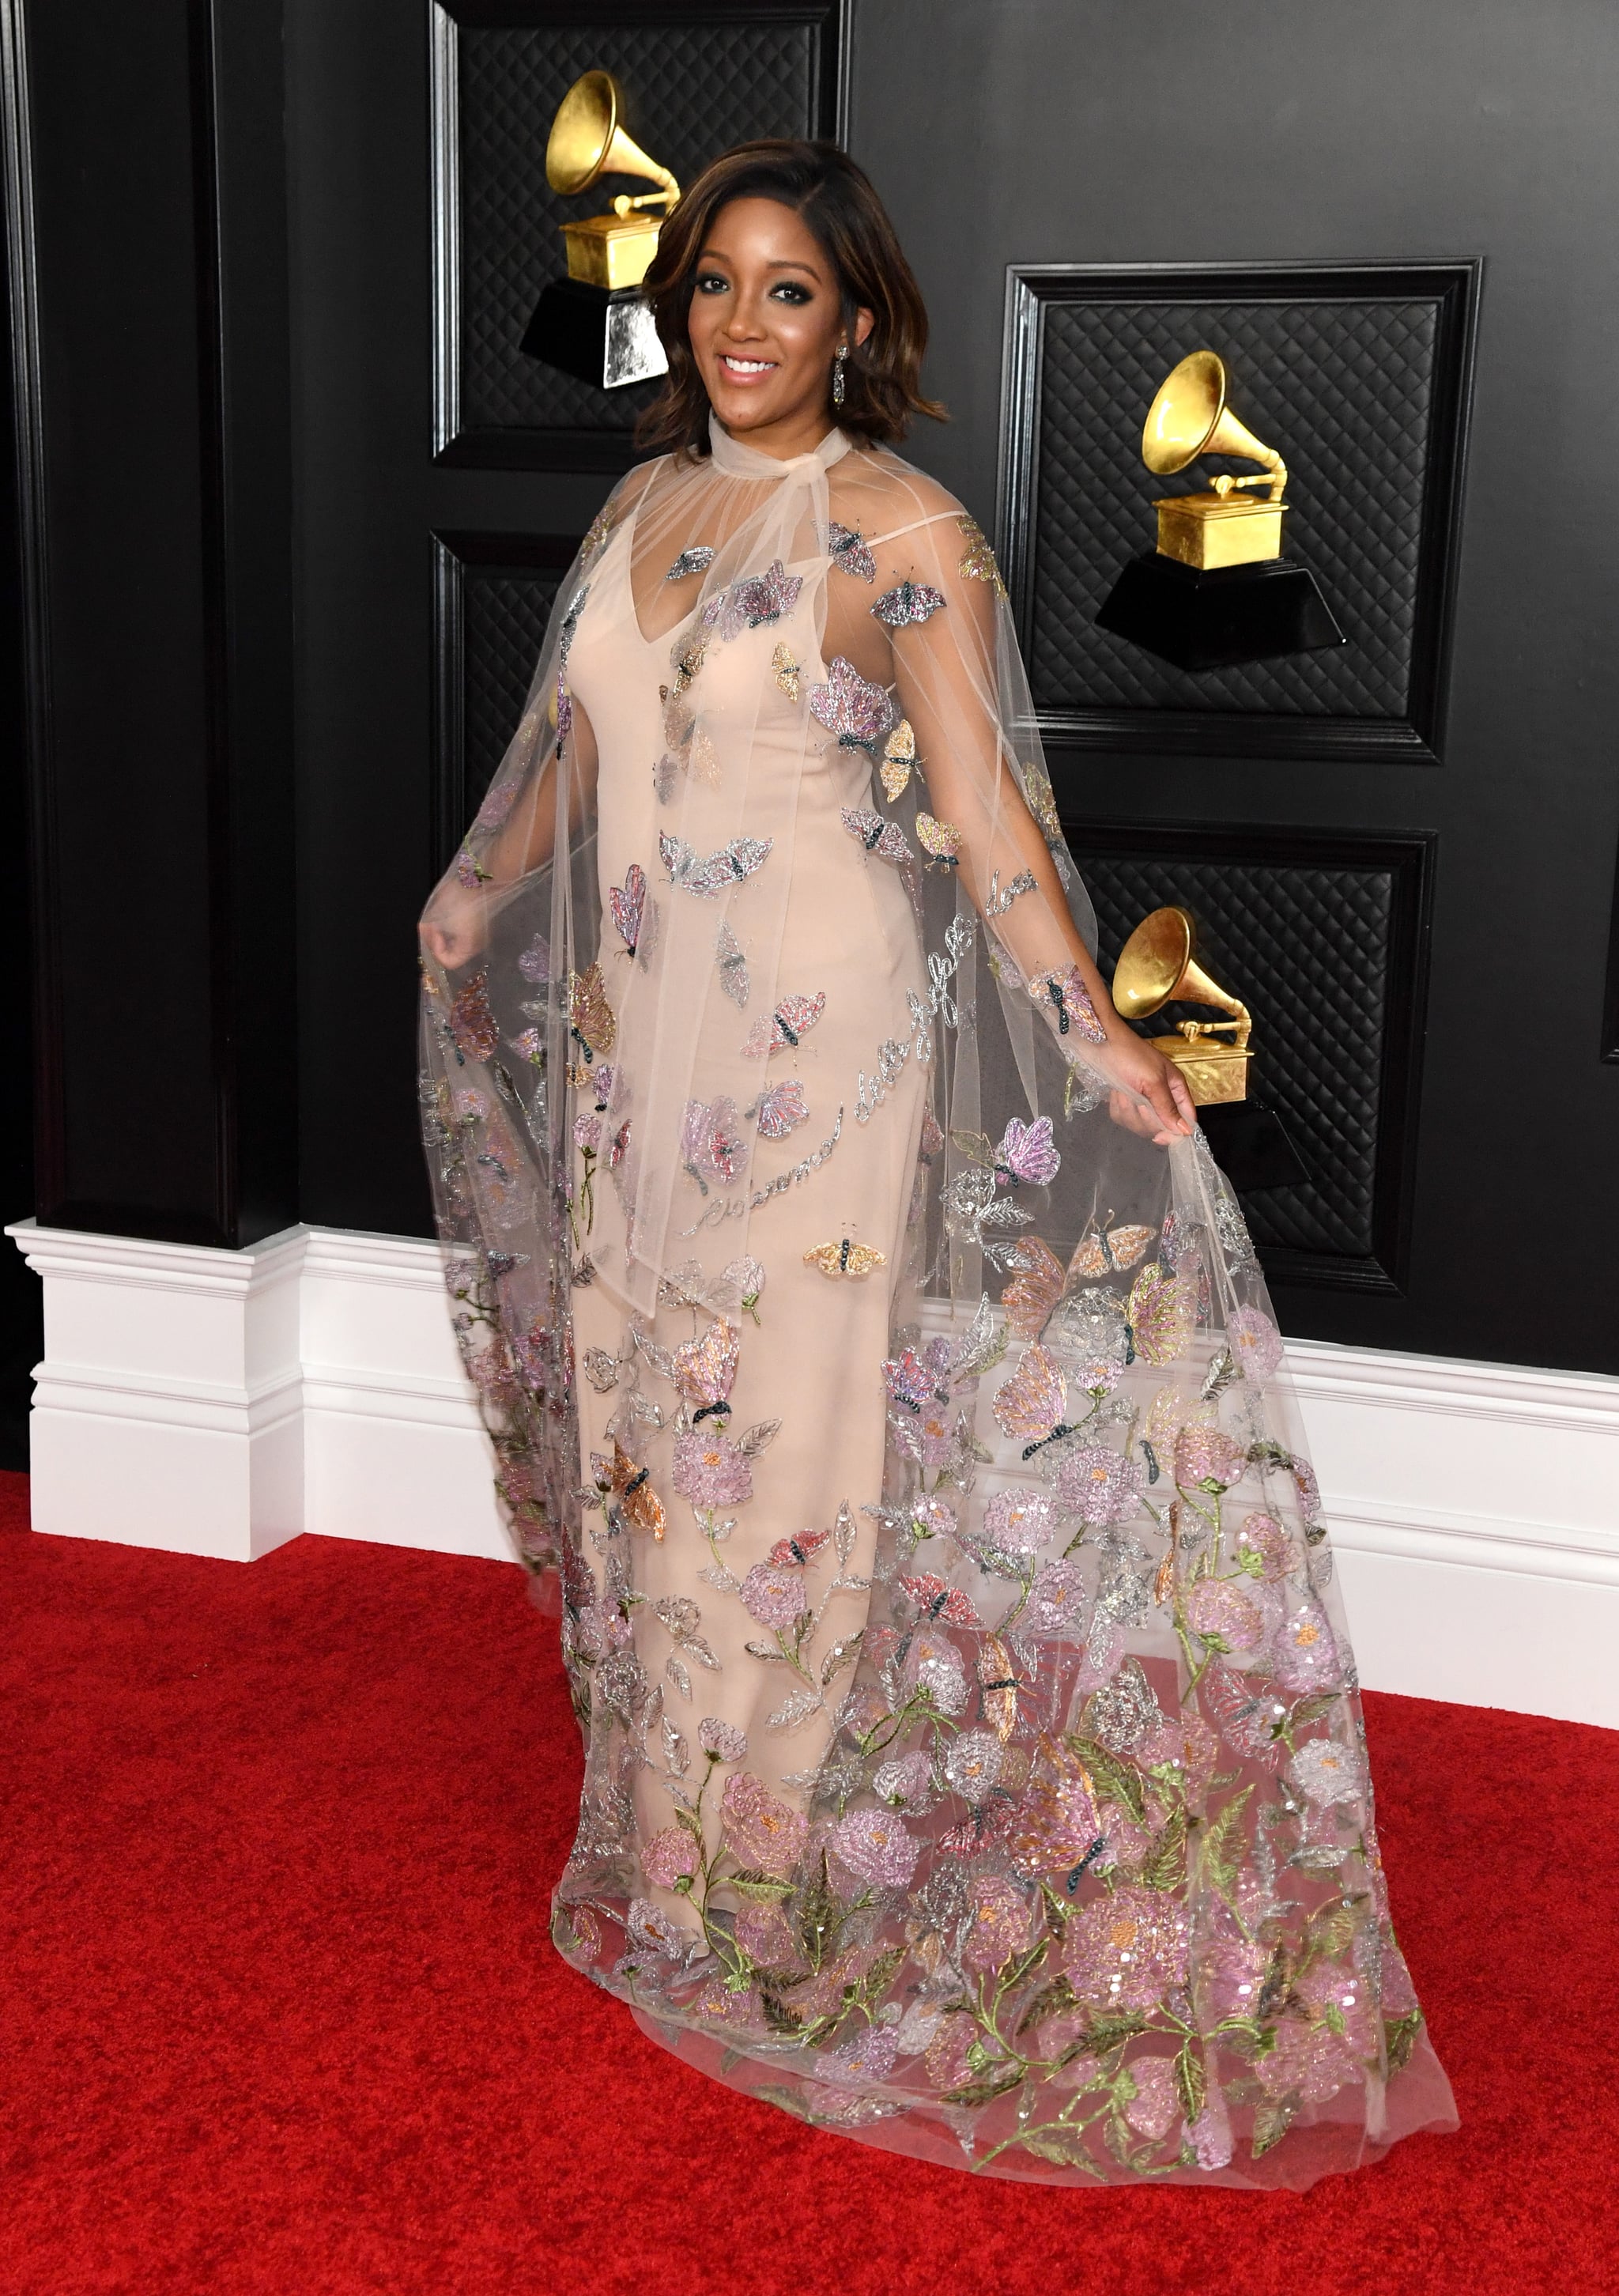 Mickey Guyton at the 2021 Grammy Awards | The Stylish, Star-Studded Grammys  Red Carpet Was Music to Our Ears | POPSUGAR Fashion Photo 21